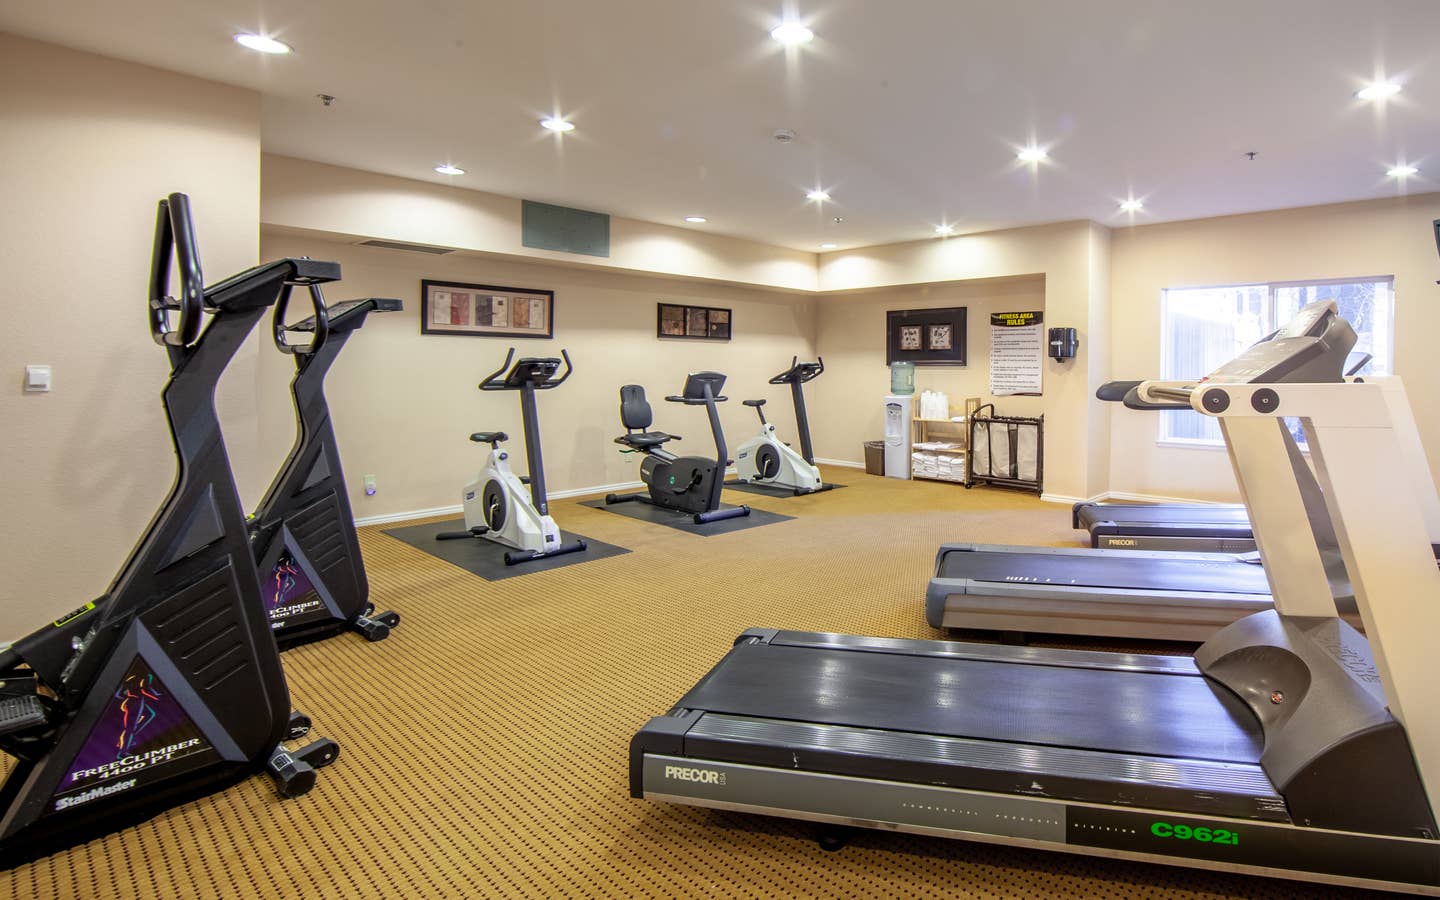 Fitness center with treadmills, ellipticals, and stationary bicycles at David Walley's Resort in Genoa, Nevada.